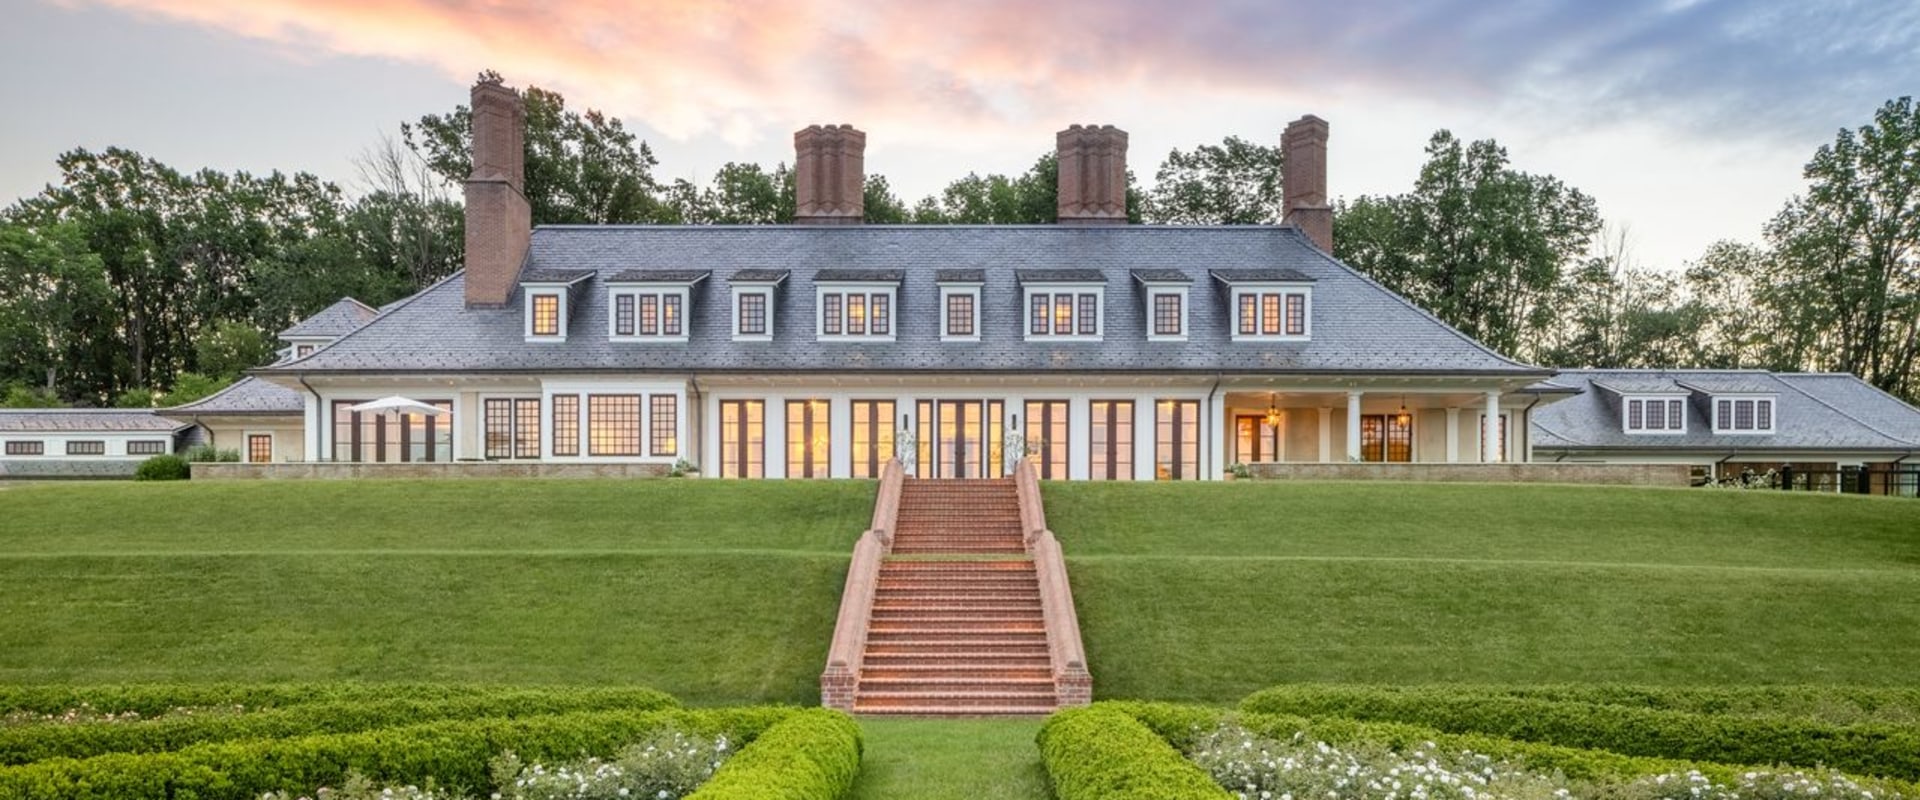 What is the Most Expensive House in Bucks County, PA?